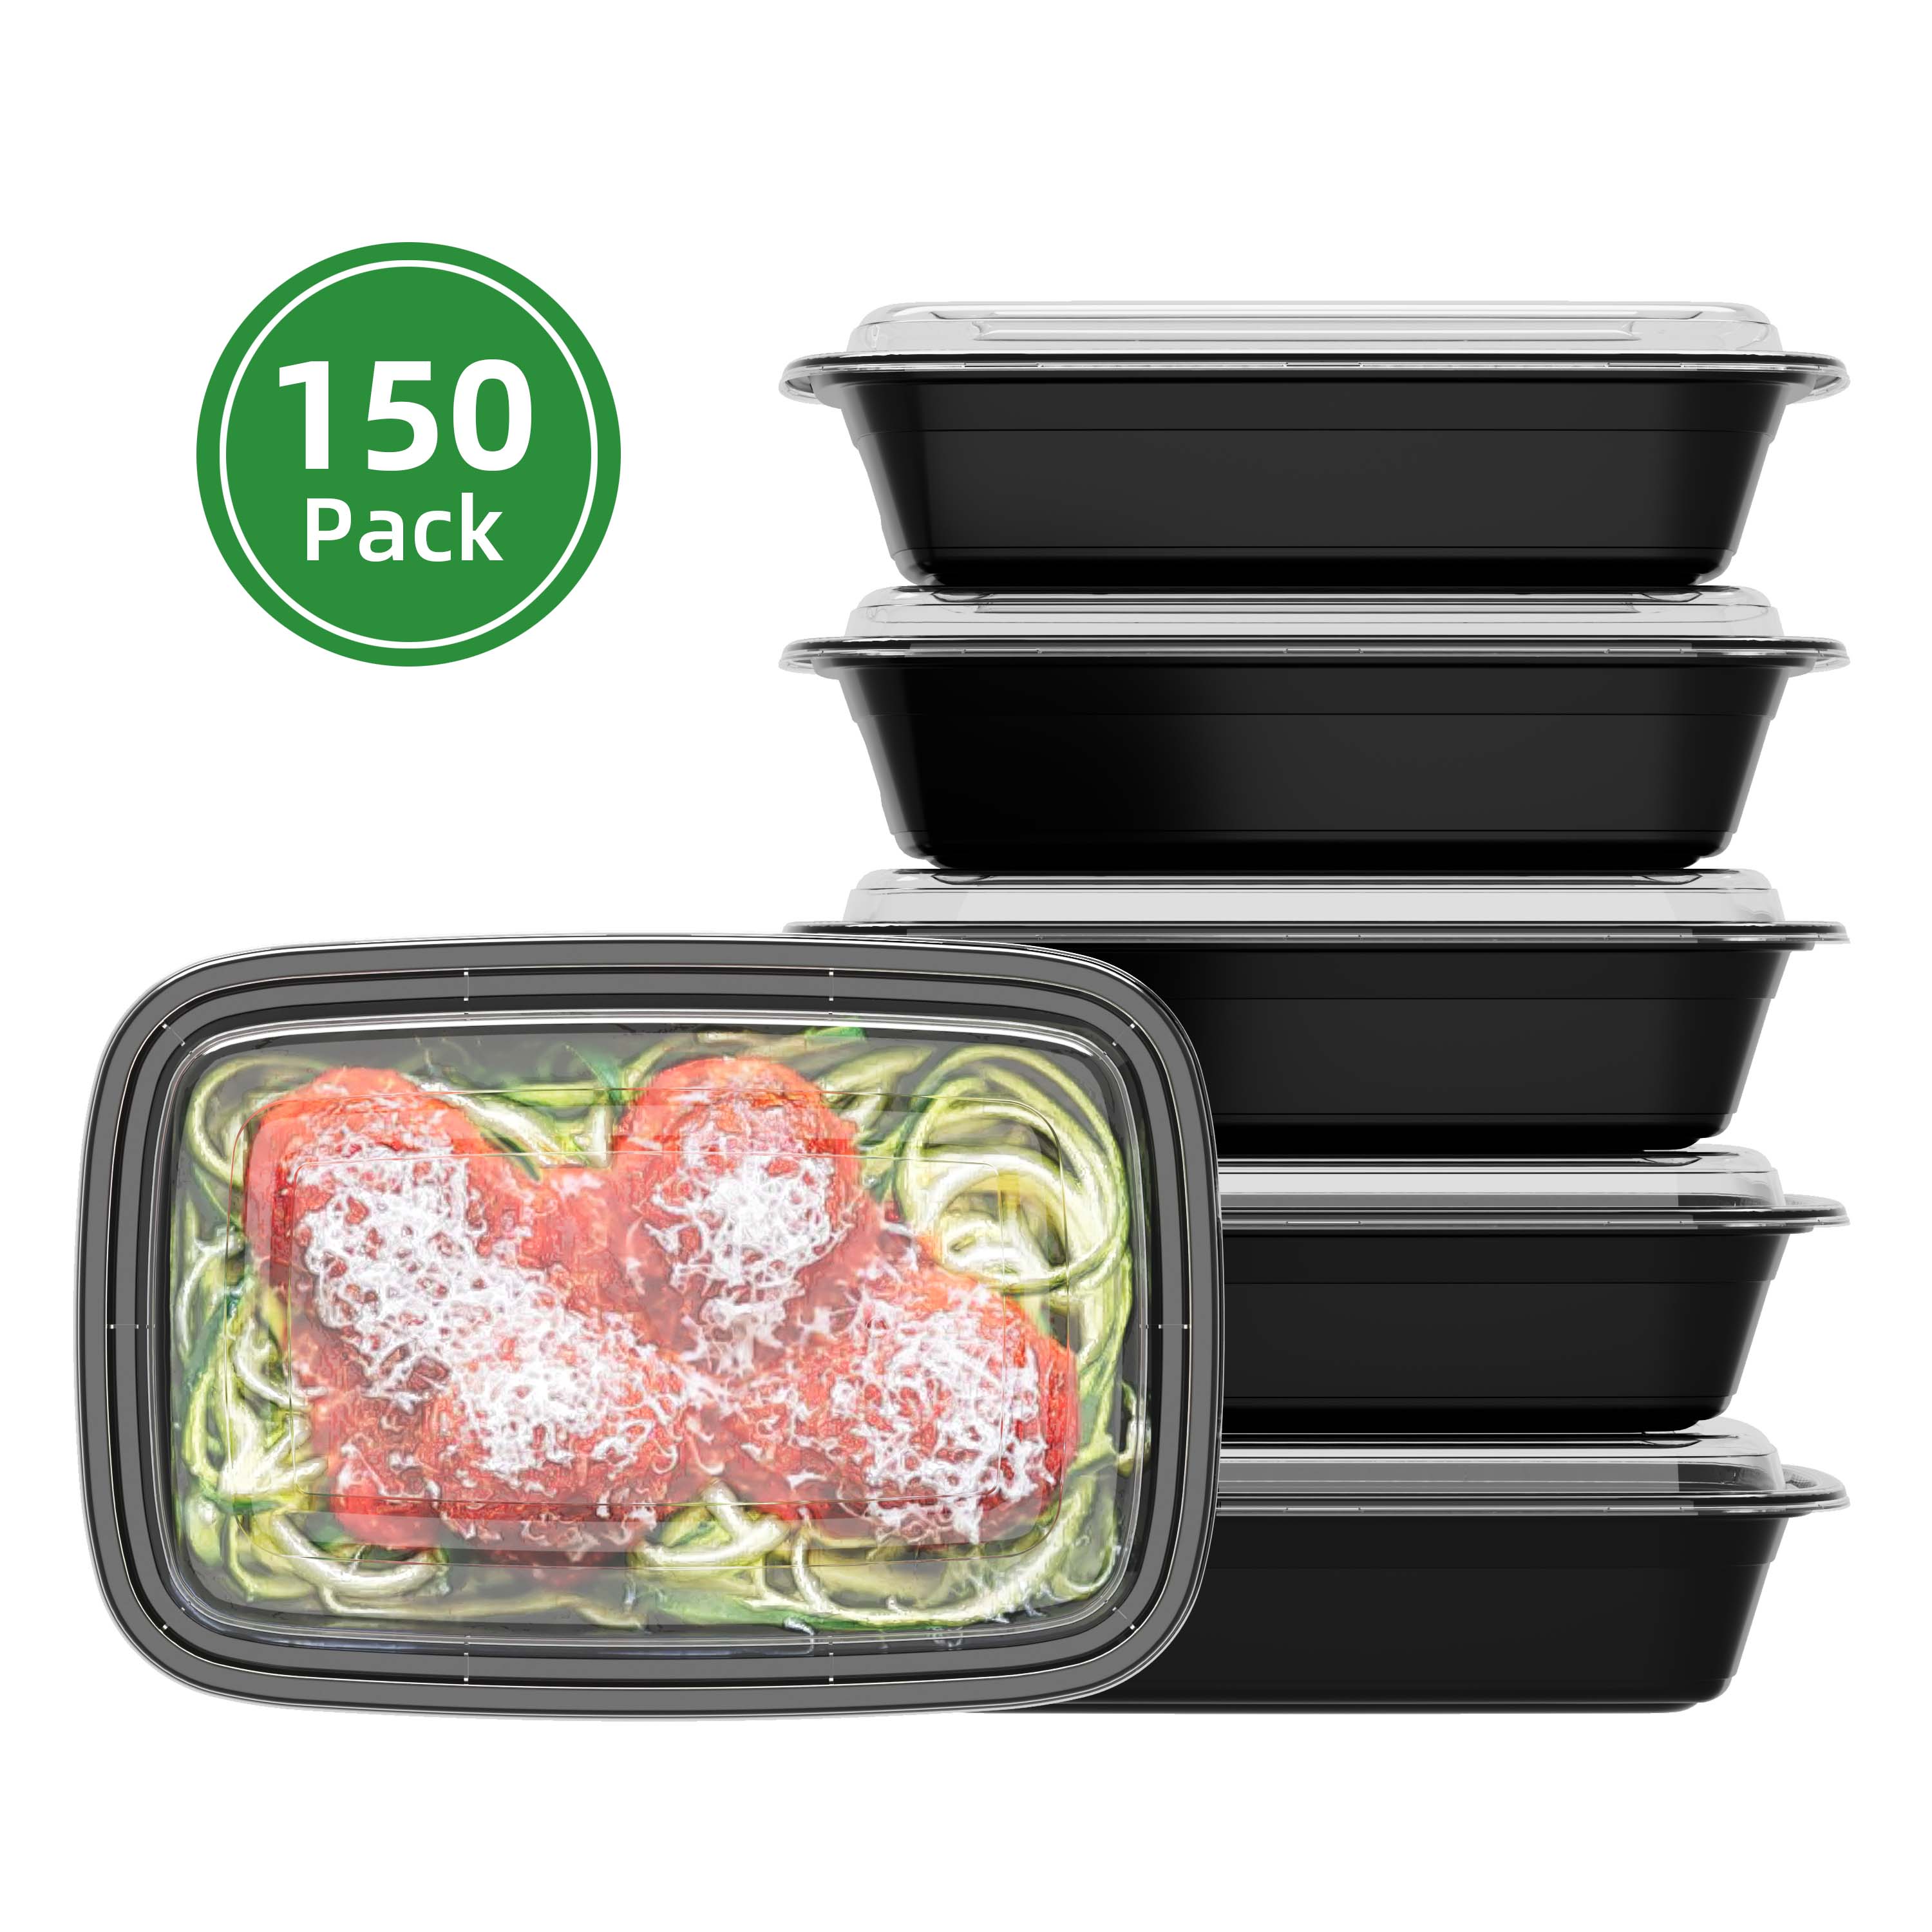 

150 Pack 24/28/32/38oz Meal Prep Containers Reusable - Take Out Food Storage Containers With Lids - Disposable Stackable Plastic To Go Lunch Boxes - Bpa Free, Microwave/dishwasher/freezer Safe